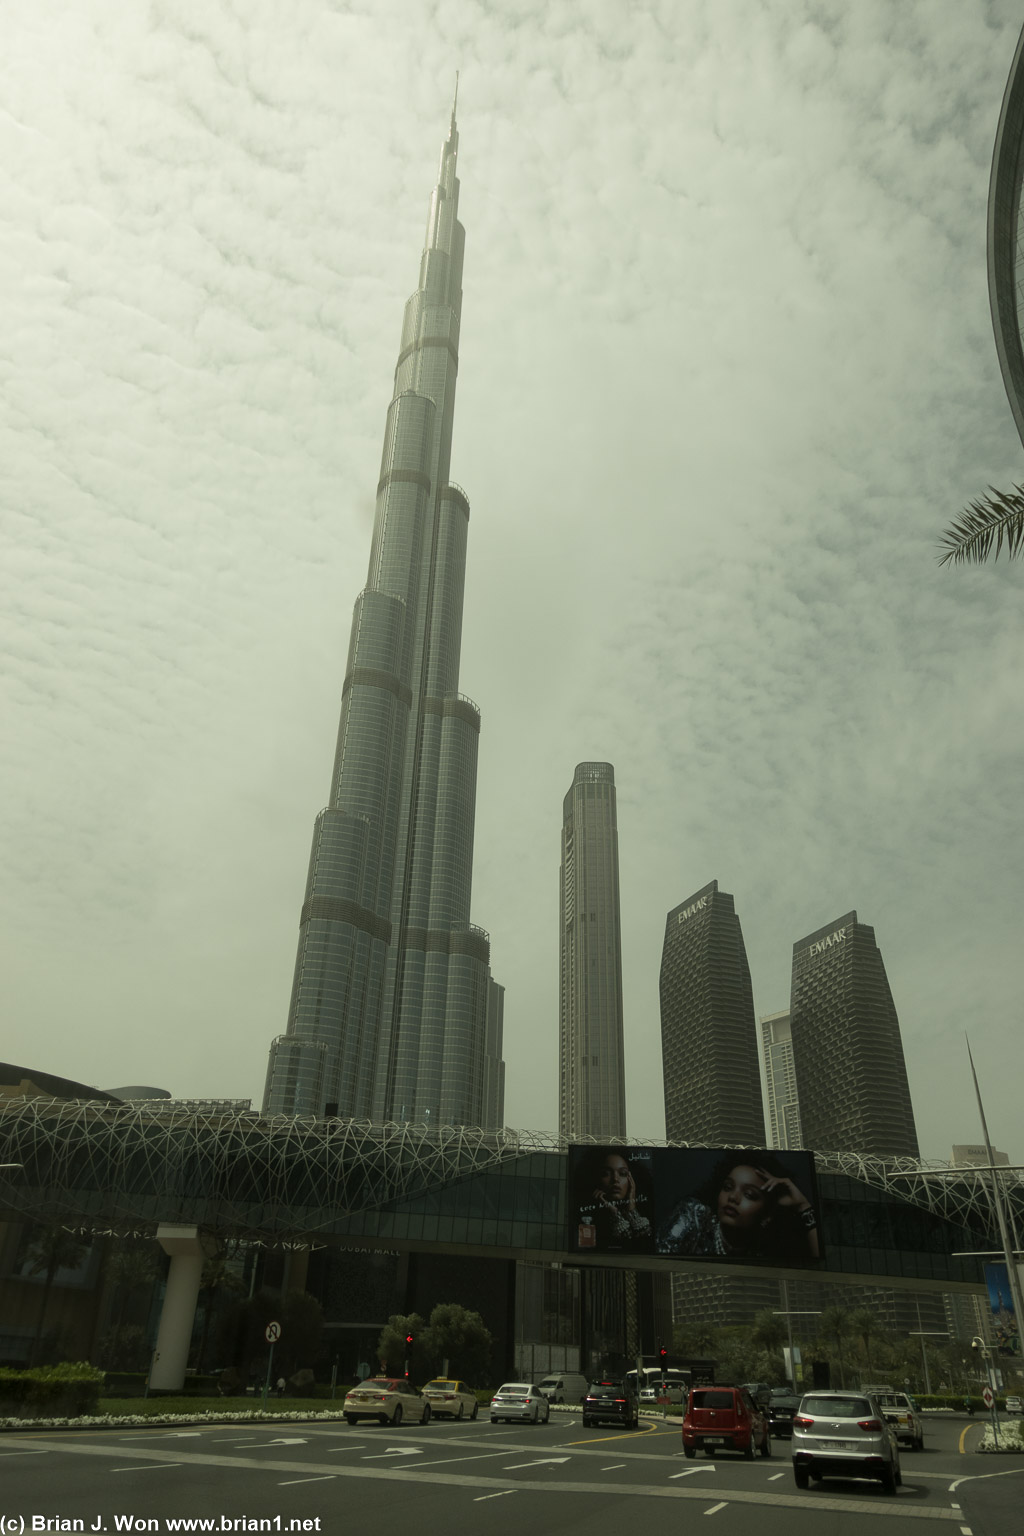 Another angle of the Burj Khalifa.